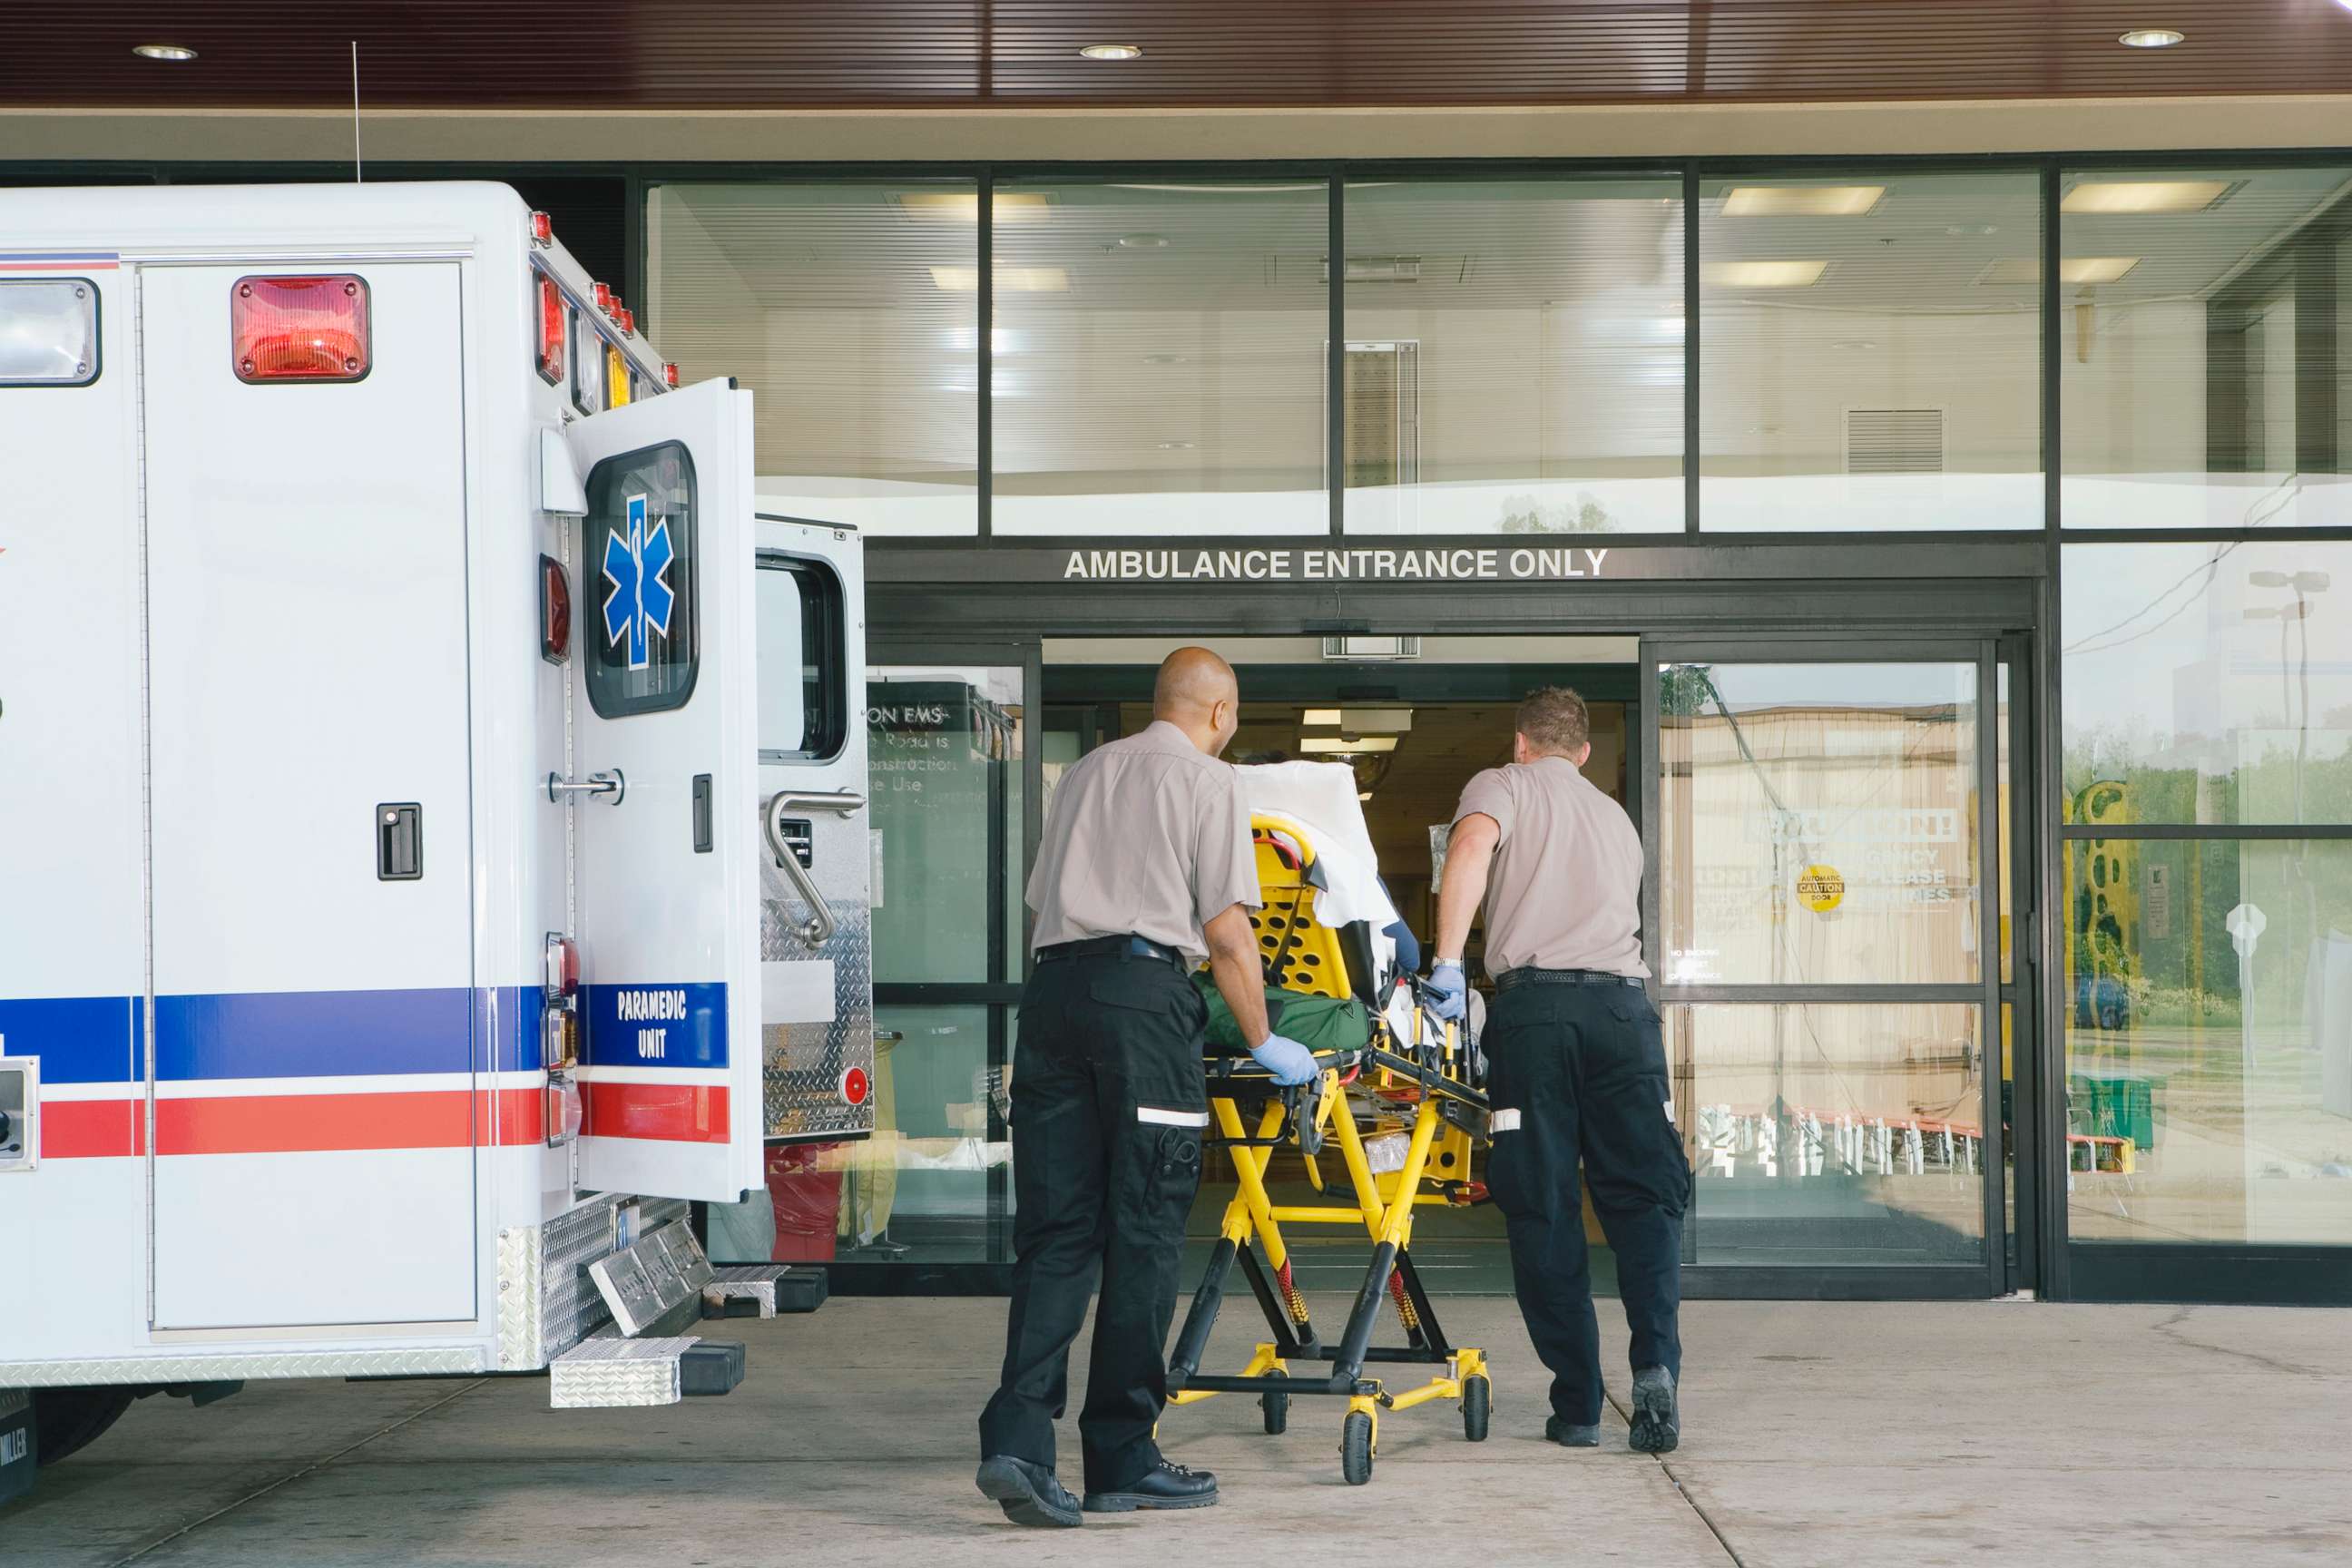 PHOTO: Paramedics take a patient on stretcher from the ambulance to the hospital.